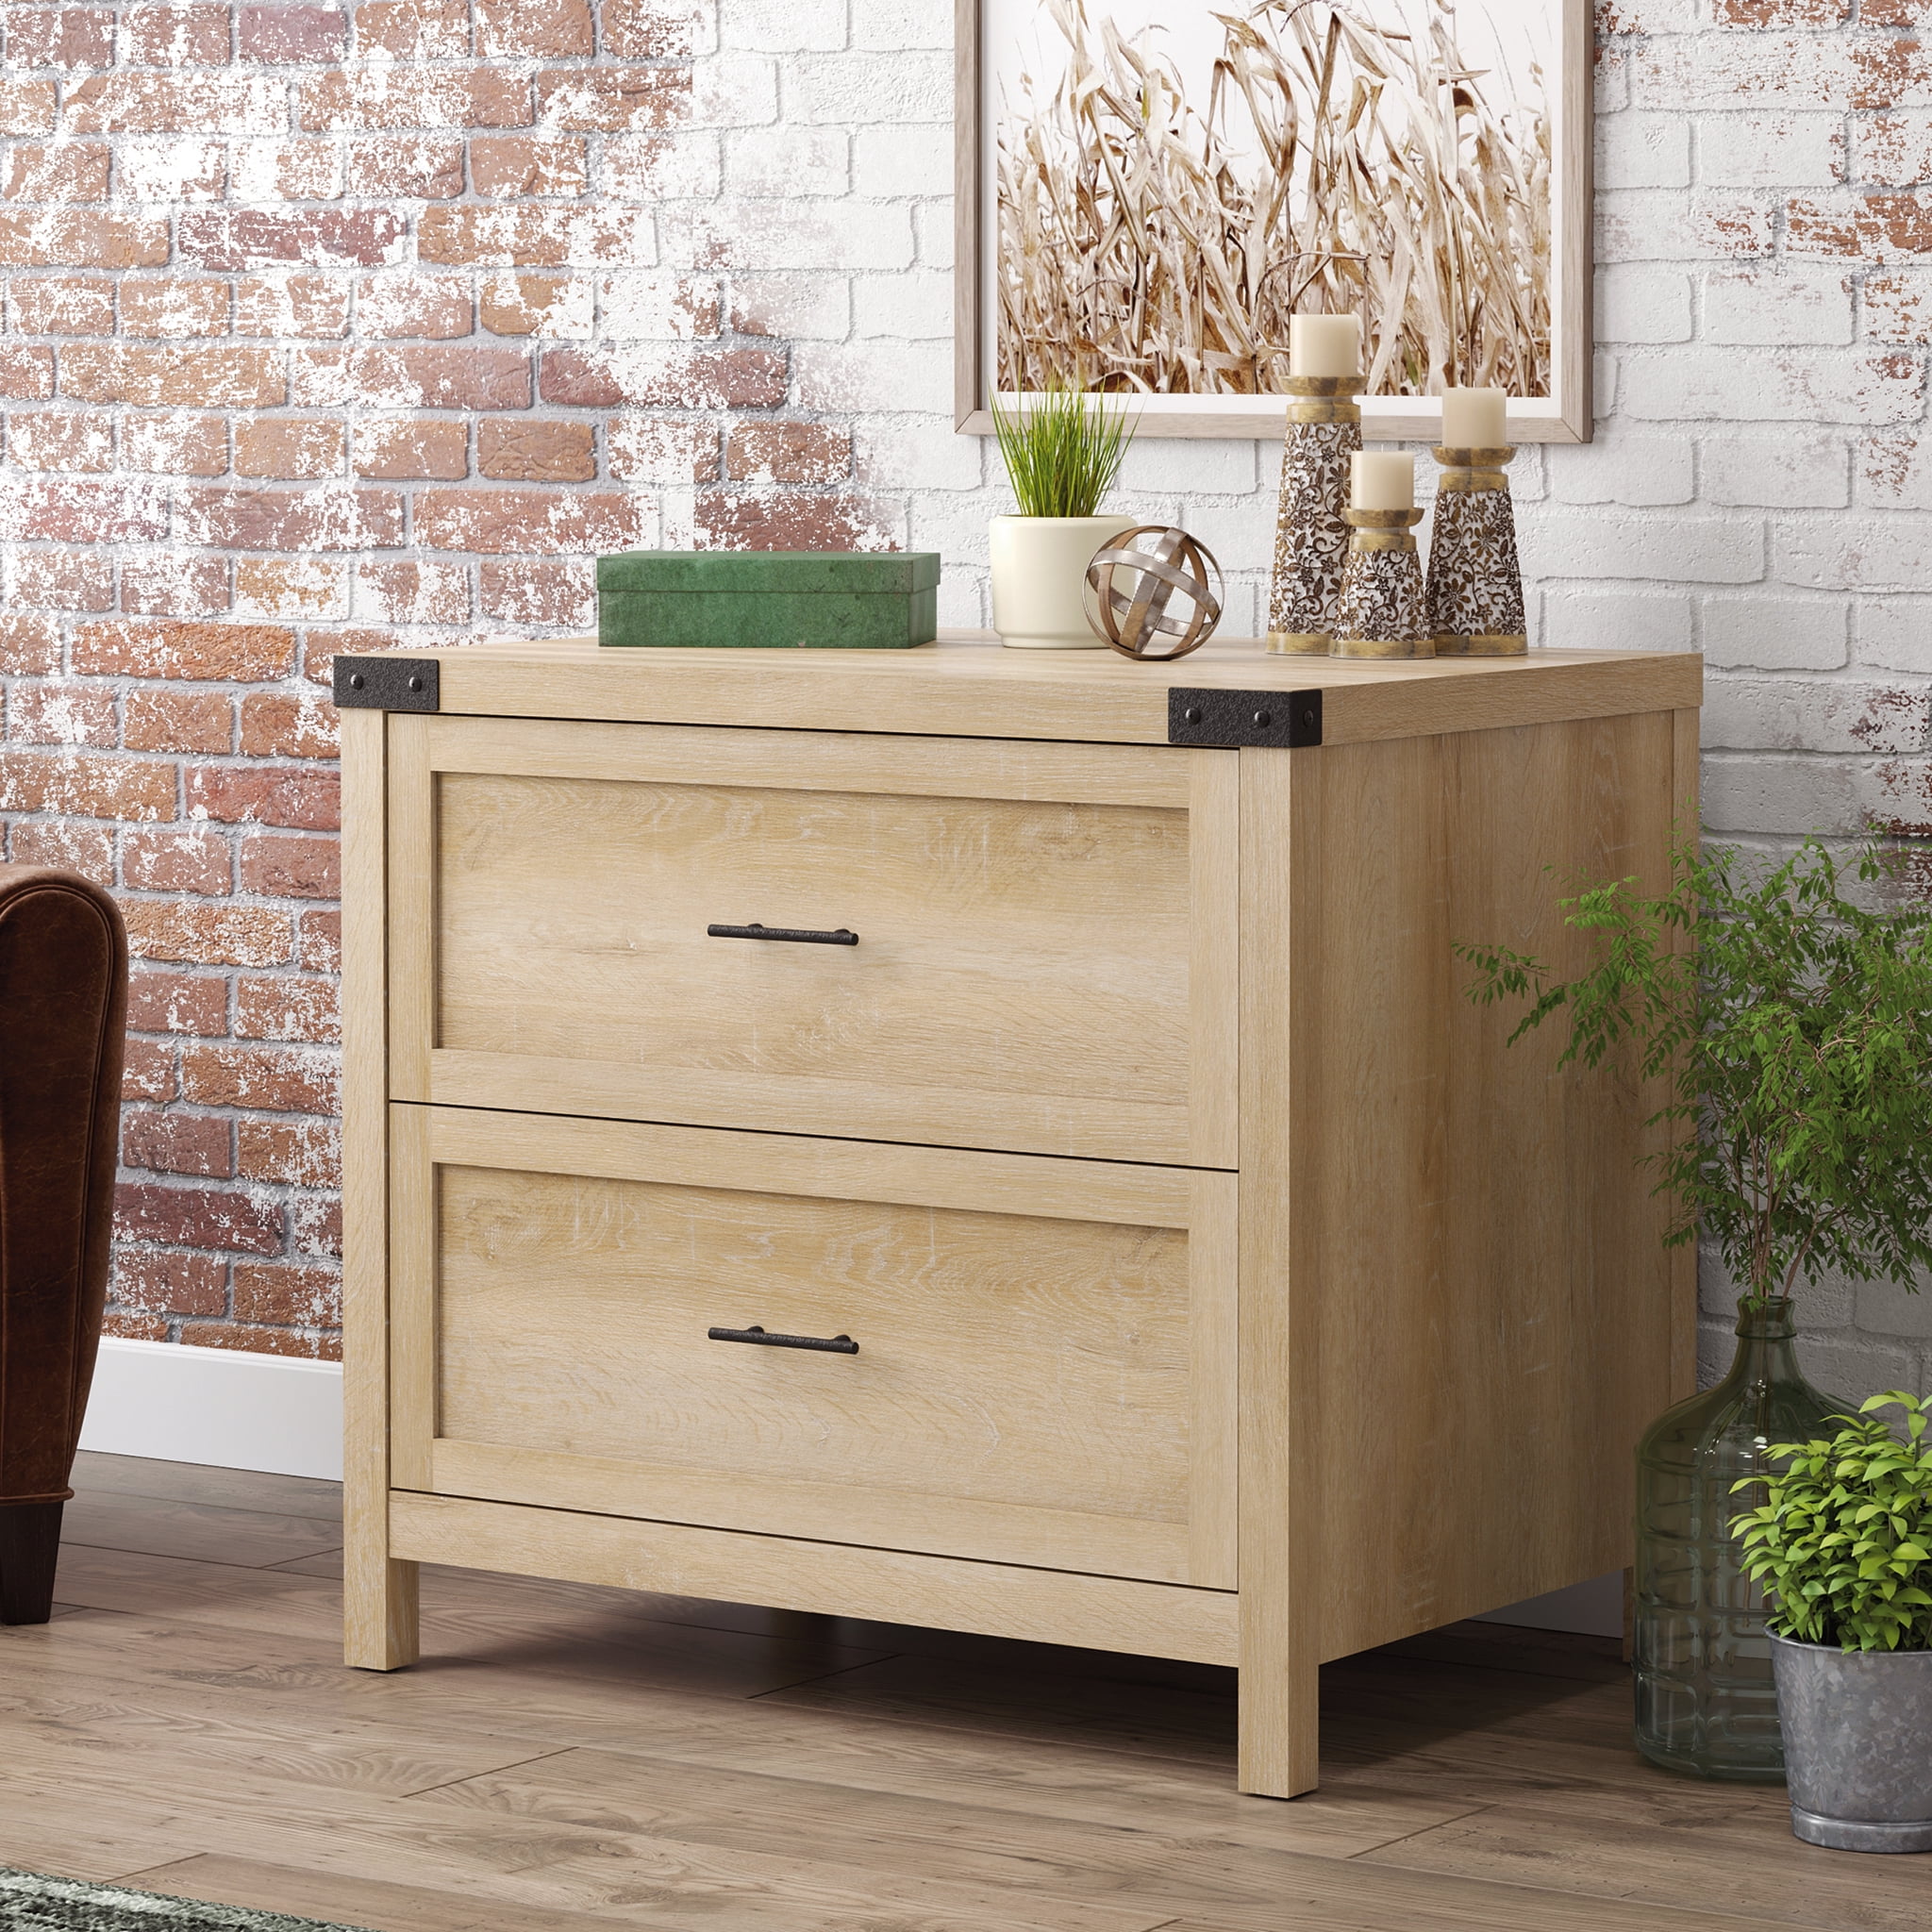 Sauder Hammond Contemporary Wood Lateral File Cabinet in Emery Oak 